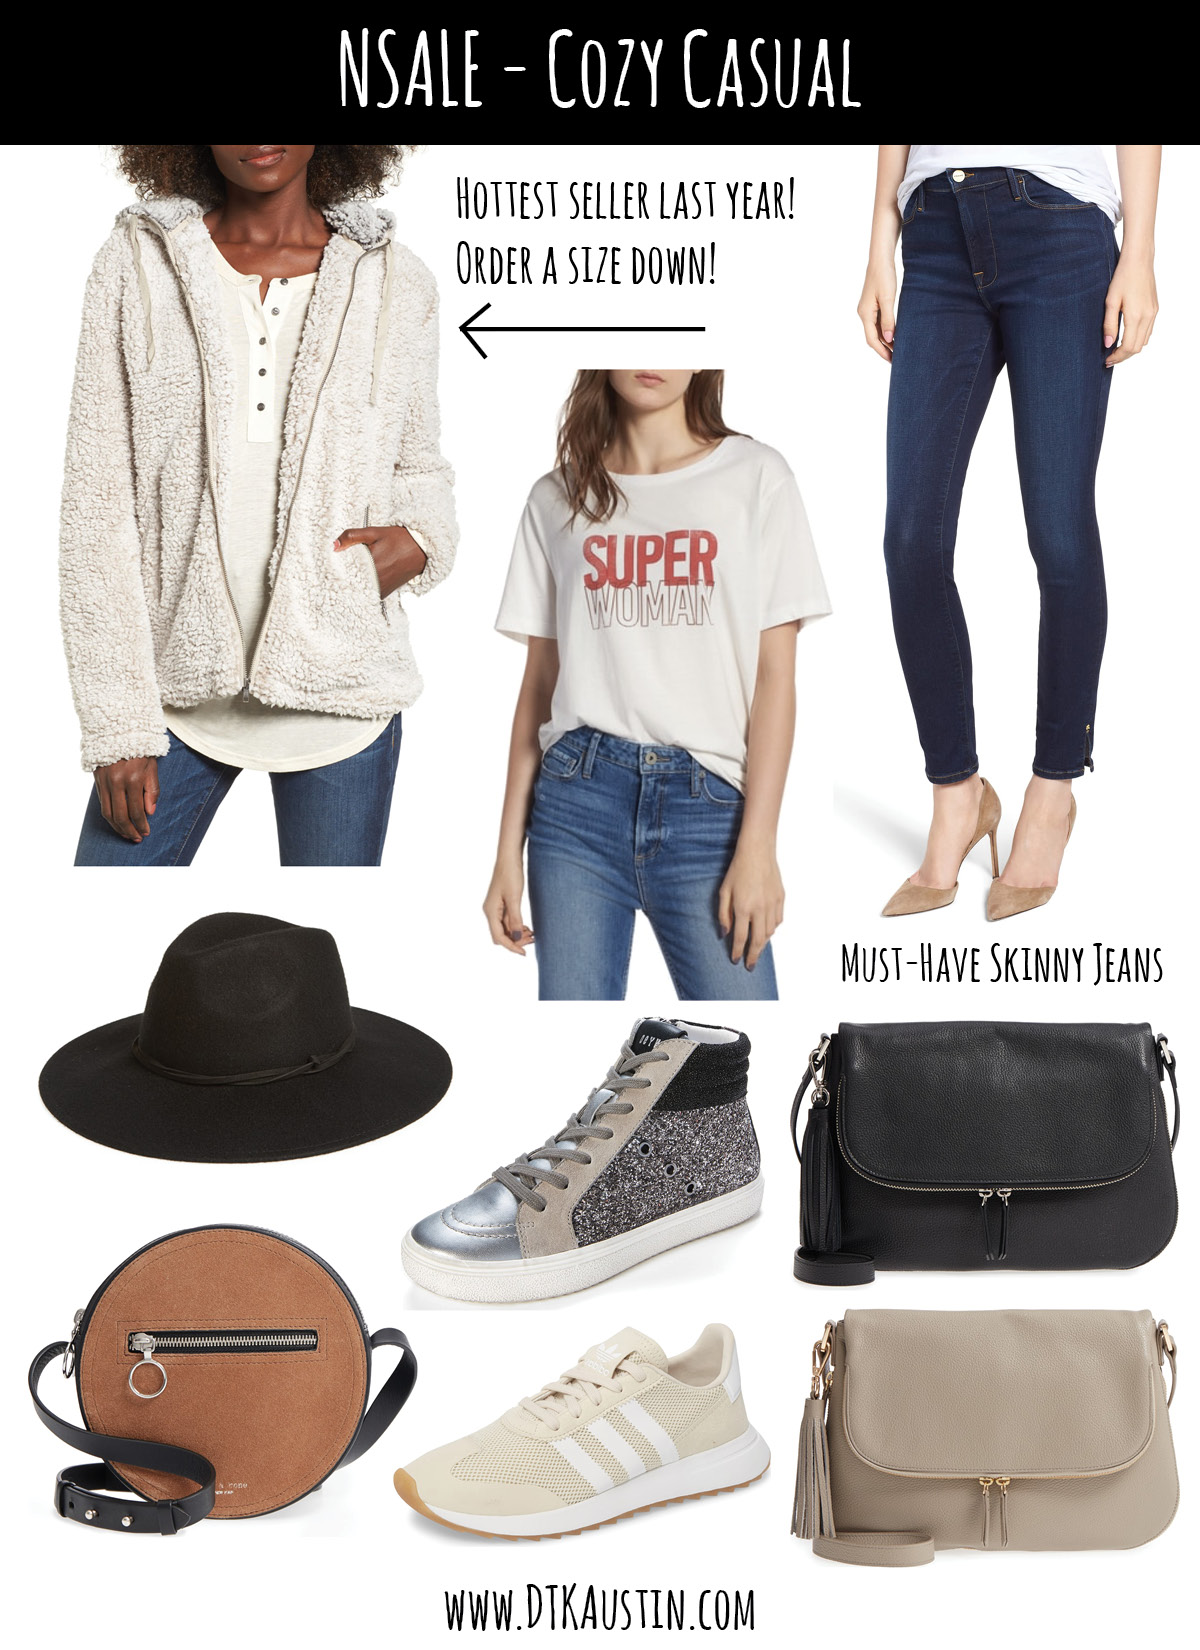 DTKAustin shares her 2018 Nordstrom Anniversary Sale NSALE Catalog Must Haves.